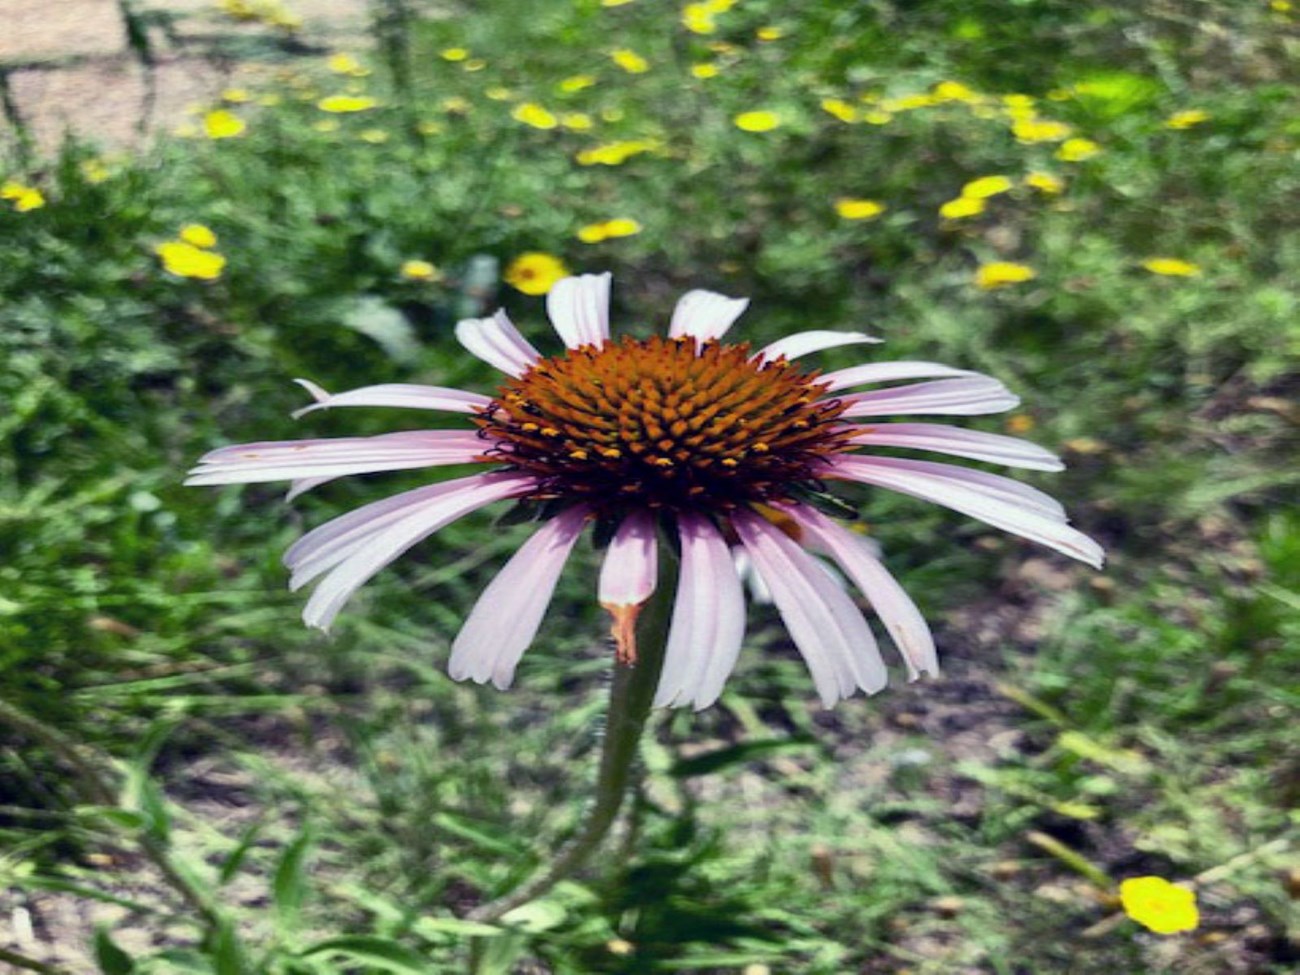 A pink coneflower blooming in the gardens